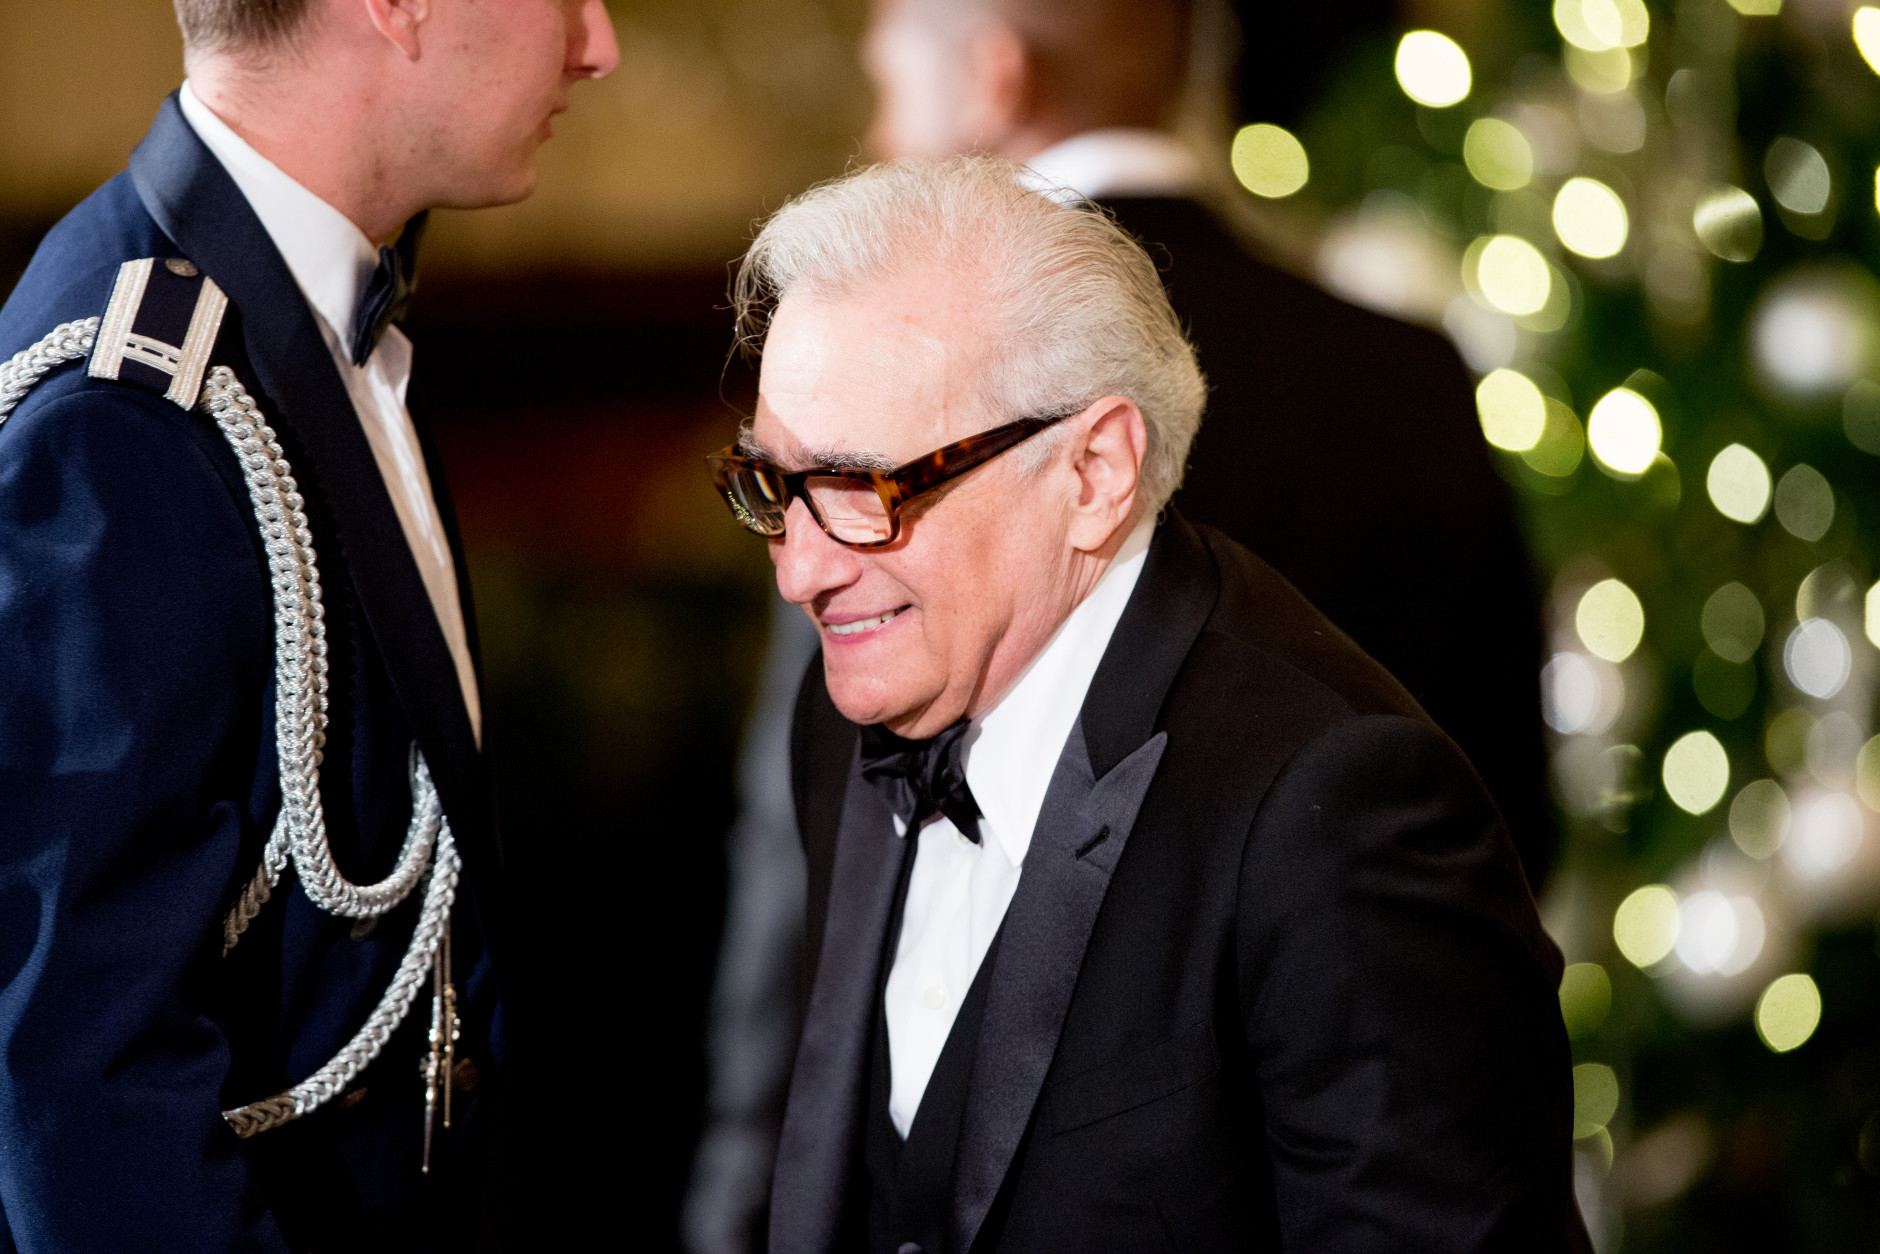 Director Martin Scorsese arrives at the 2015 Kennedy Center Honors reception in the East Room of the White House, Sunday, Dec. 6, 2015, in Washington. The 2015 Kennedy Center Honors Honorees are singer-songwriter Carole King, filmmaker George Lucas, actress and singer Rita Moreno, conductor Seiji Ozawa, and actress Cicely Tyson. (AP Photo/Andrew Harnik)